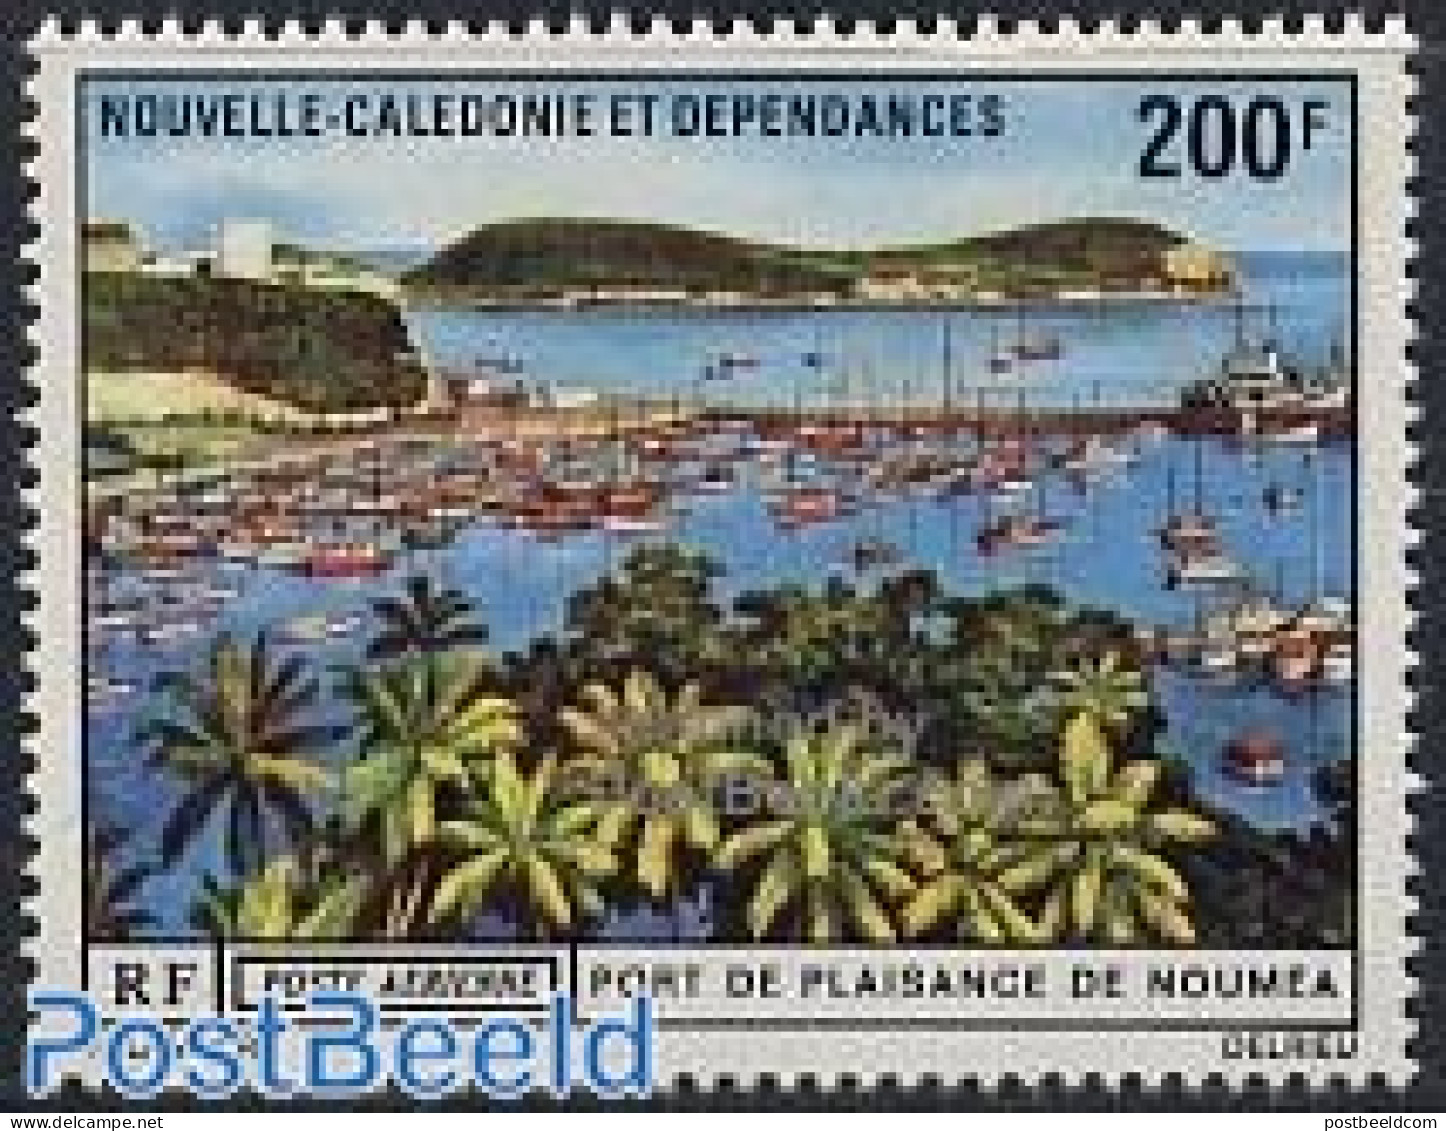 New Caledonia 1971 Yacht Harbour 1v, Mint NH, Transport - Ships And Boats - Neufs